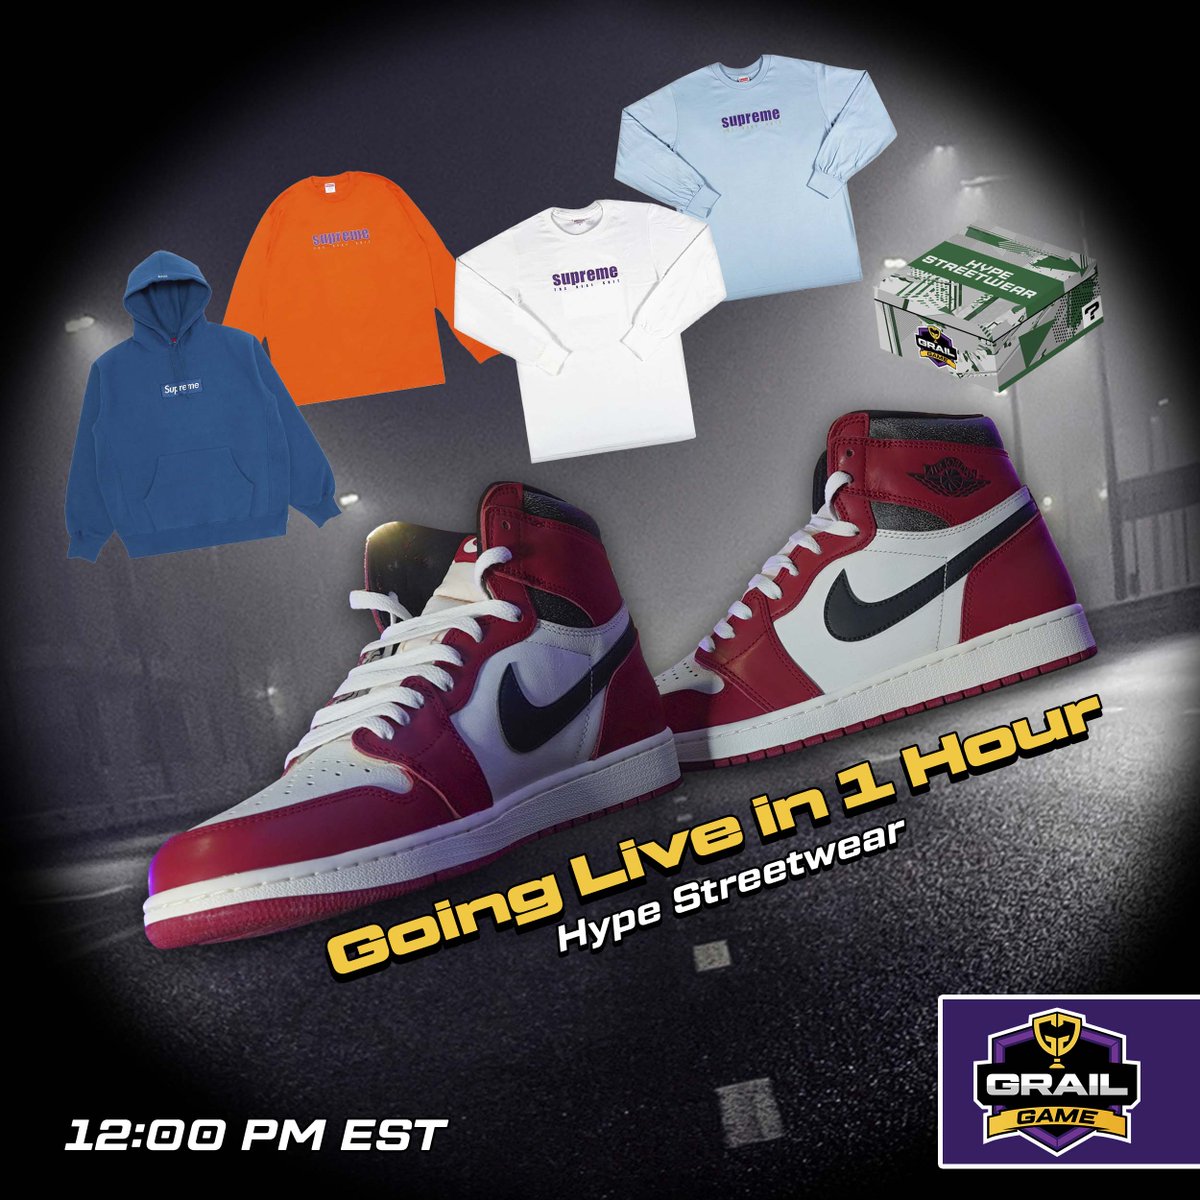 #GrailGamers! #SneakerHeads! Going Live in 1 Hour! 💥⁠ ⁠HYPE Streetwear #MysteryBox Game! 🎮️ is Goes LIVE at 12:00pm EST! 🎉⁠ ⁠ 

This one is for the #Fashionista, #Sneakercollectors, and #Supreme fans, because it features some of the Hottest 🔥 apparel in #Streetwear…